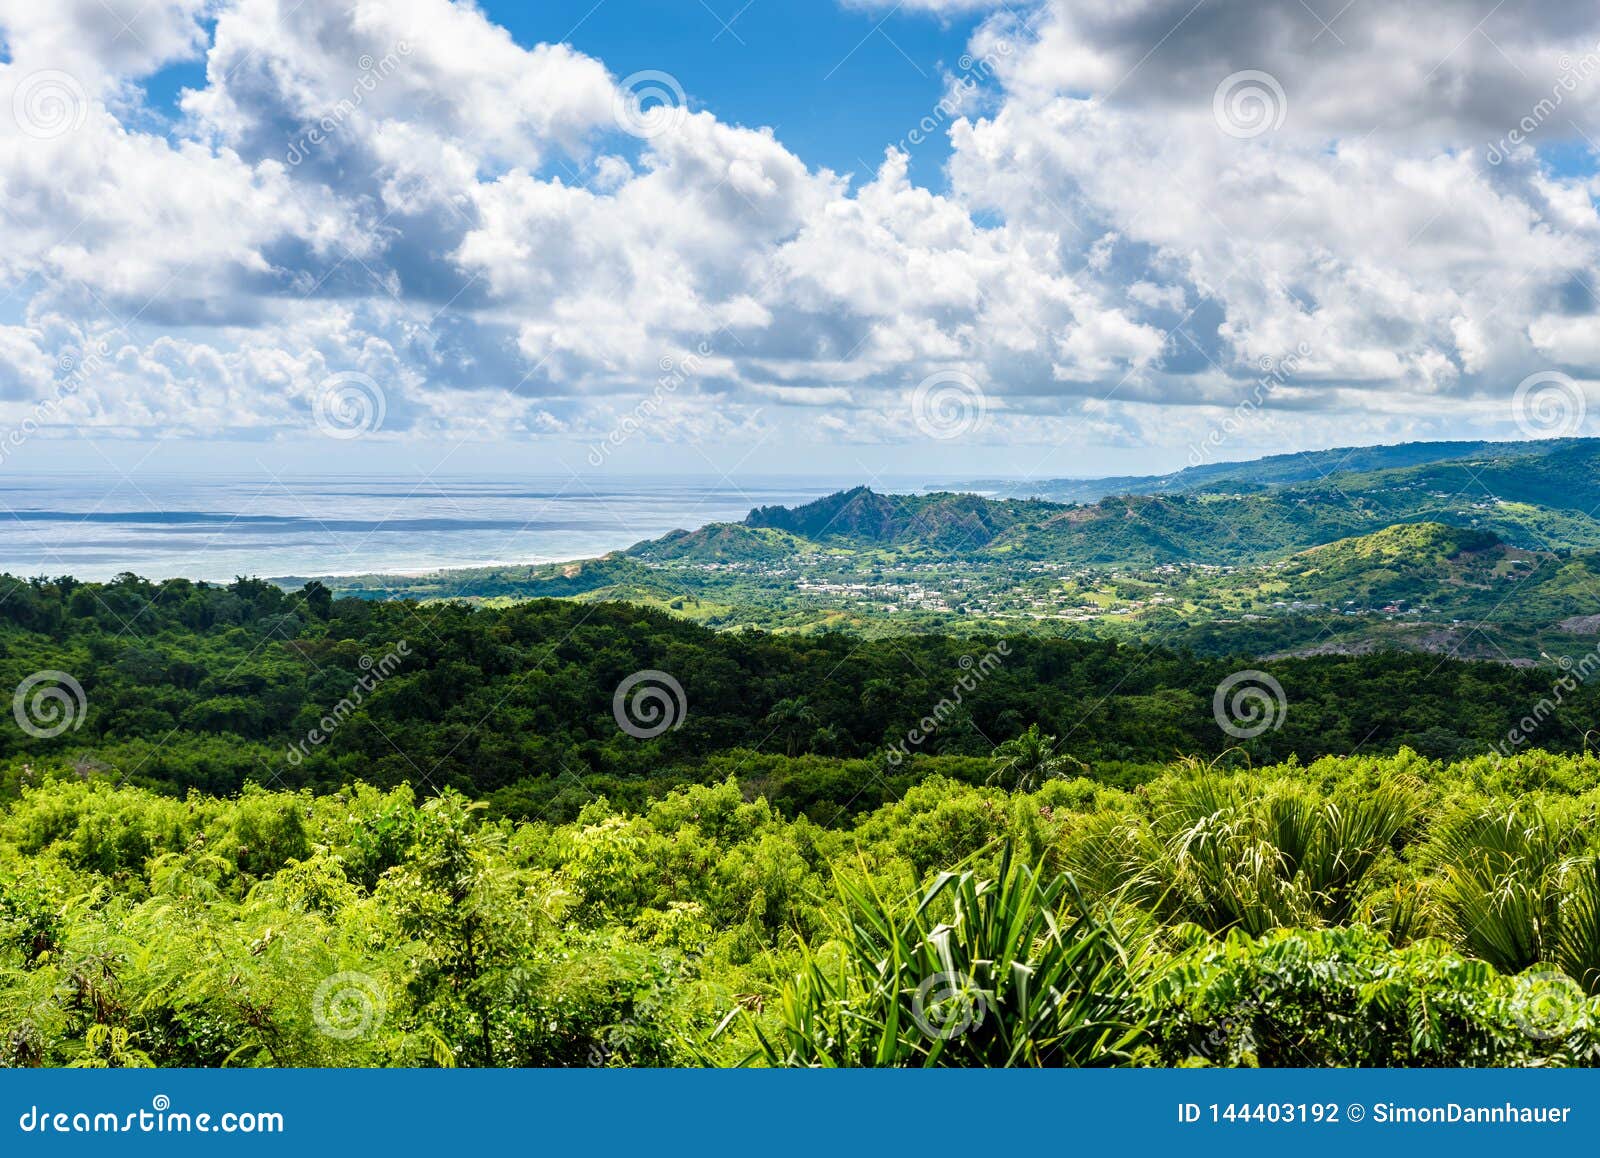 Farley Hill National Park On The Caribbean Island Of Barbados. It Is A ...